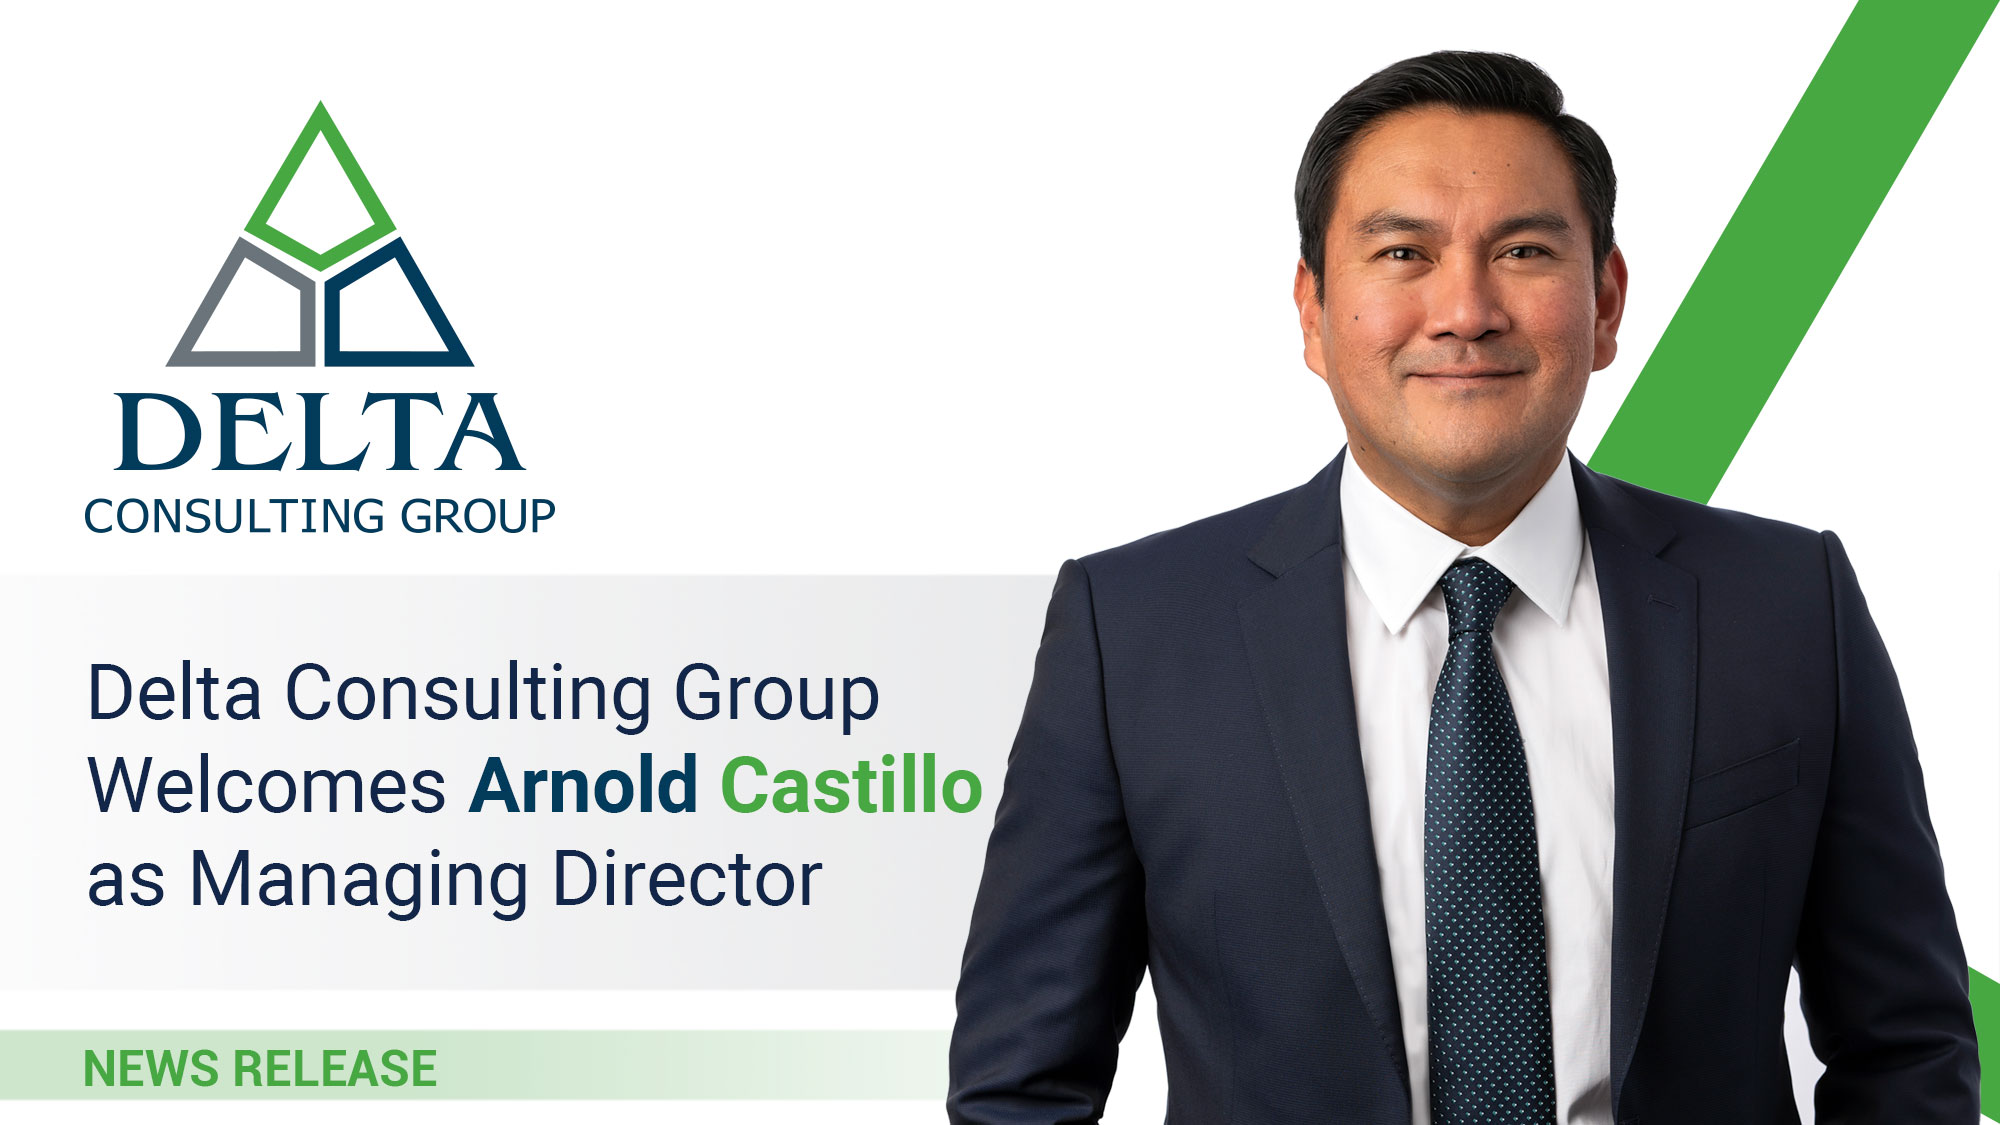 Delta Consulting Group Welcomes Arnold Y. Castillo as Managing Director in the U.S.